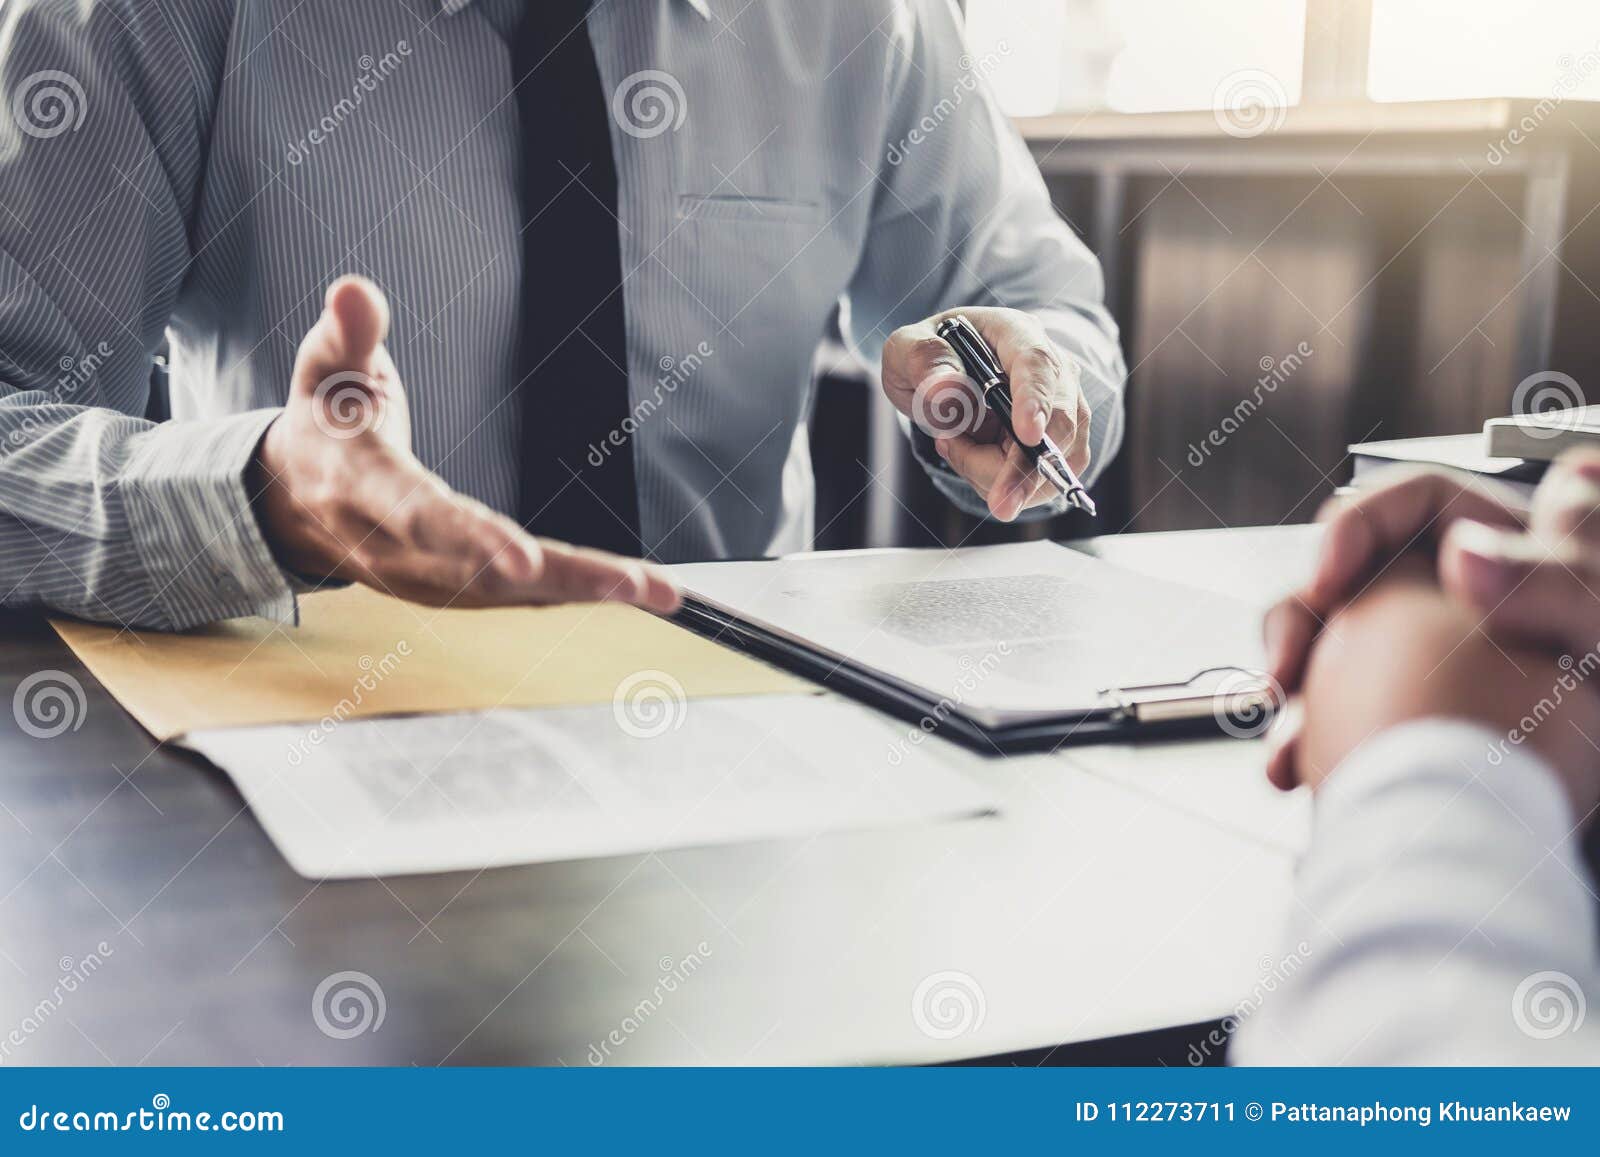 businessman and male lawyer or judge consult having team meeting